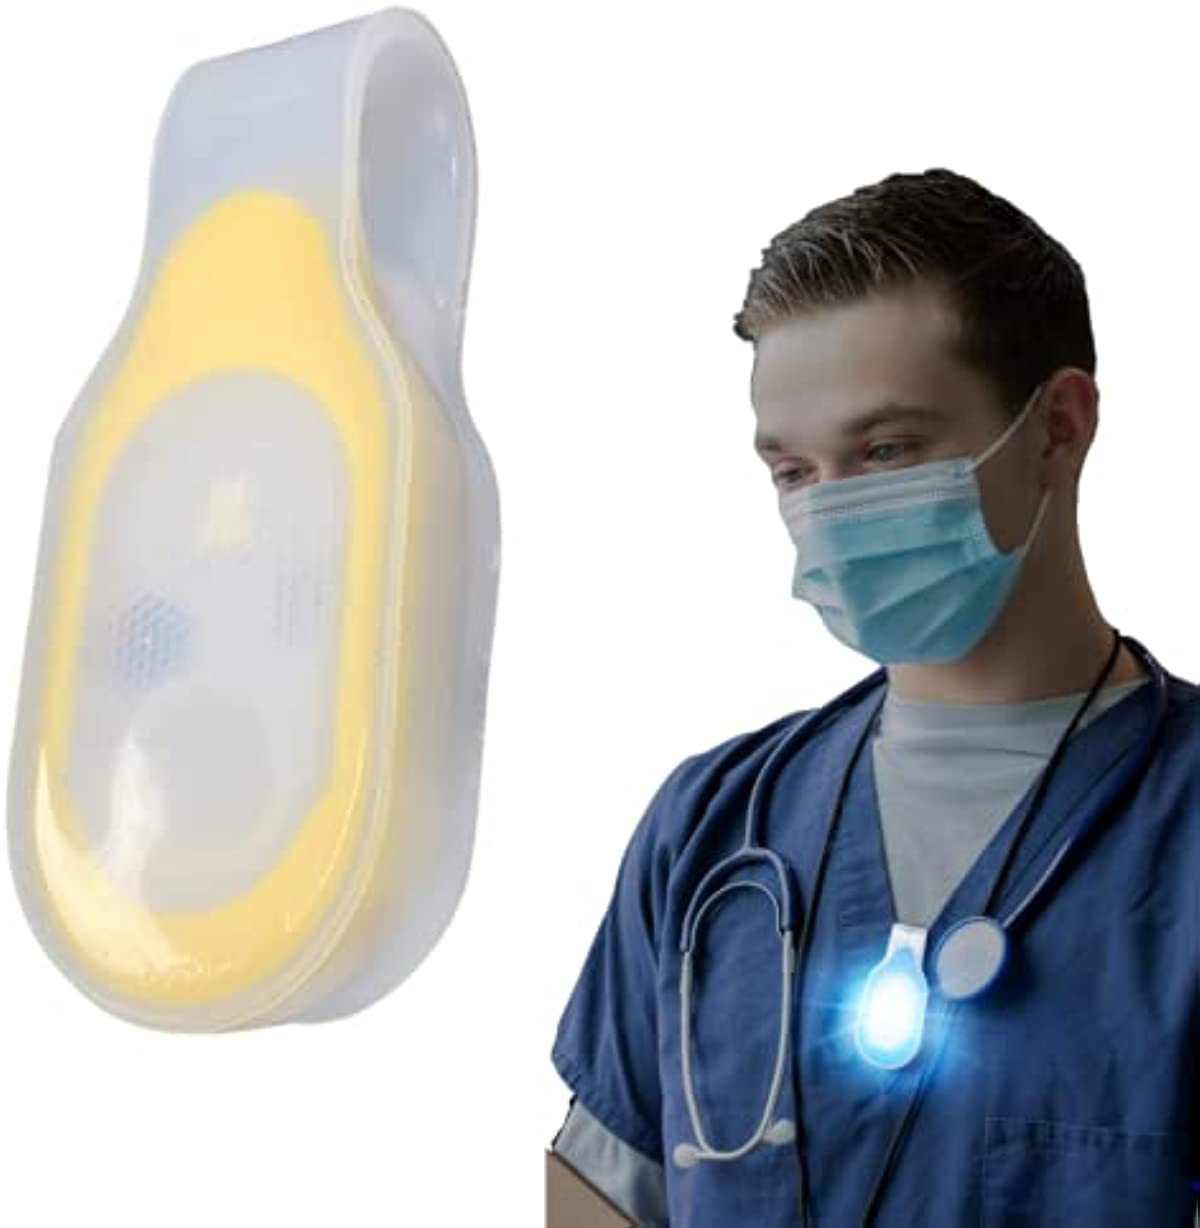 First Lifesaver LED Flashlight Clip On Nursing Night Light Hands Free Strong Magnetic Grip for Night Shift (Yellow)